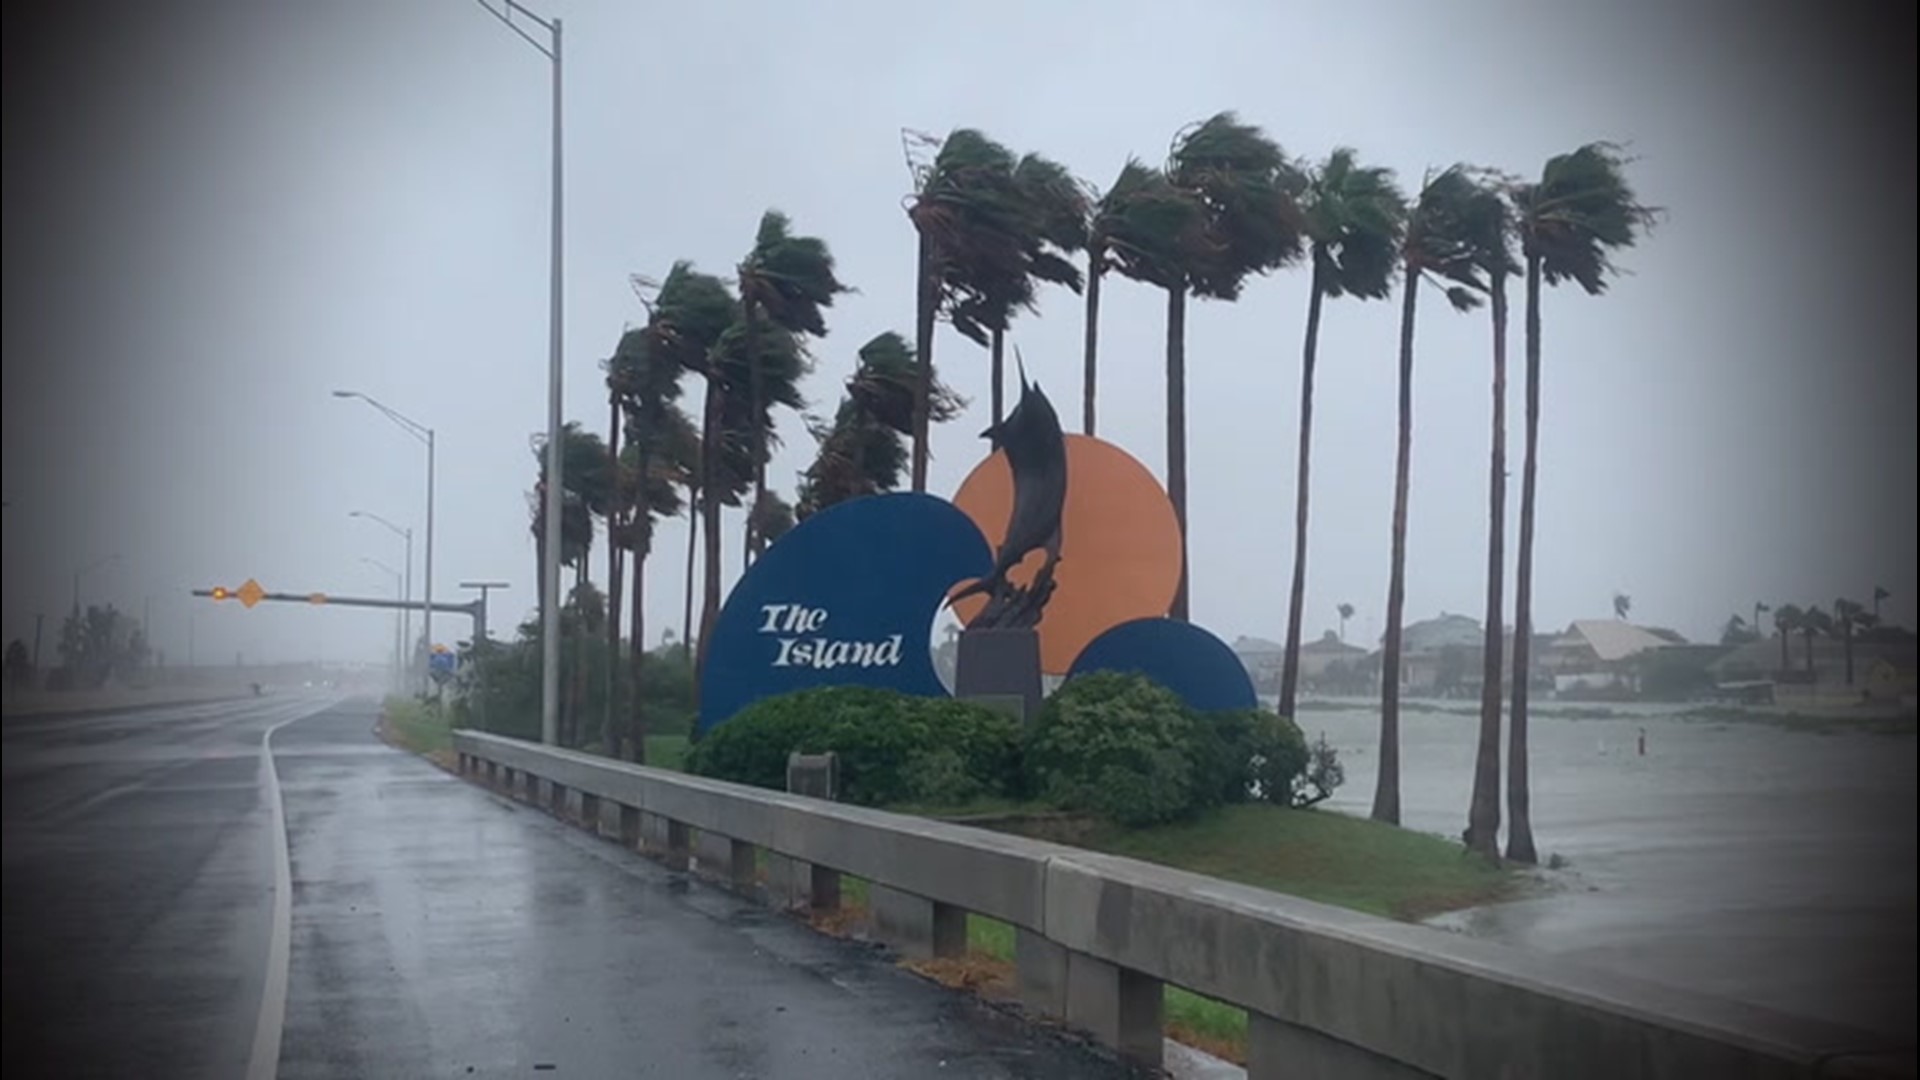 In May, AccuWeather forecasters said this hurricane season would be significant. Now, Marvin Gomez breaks down how that forecast came true and takes a look at the season's highlights.